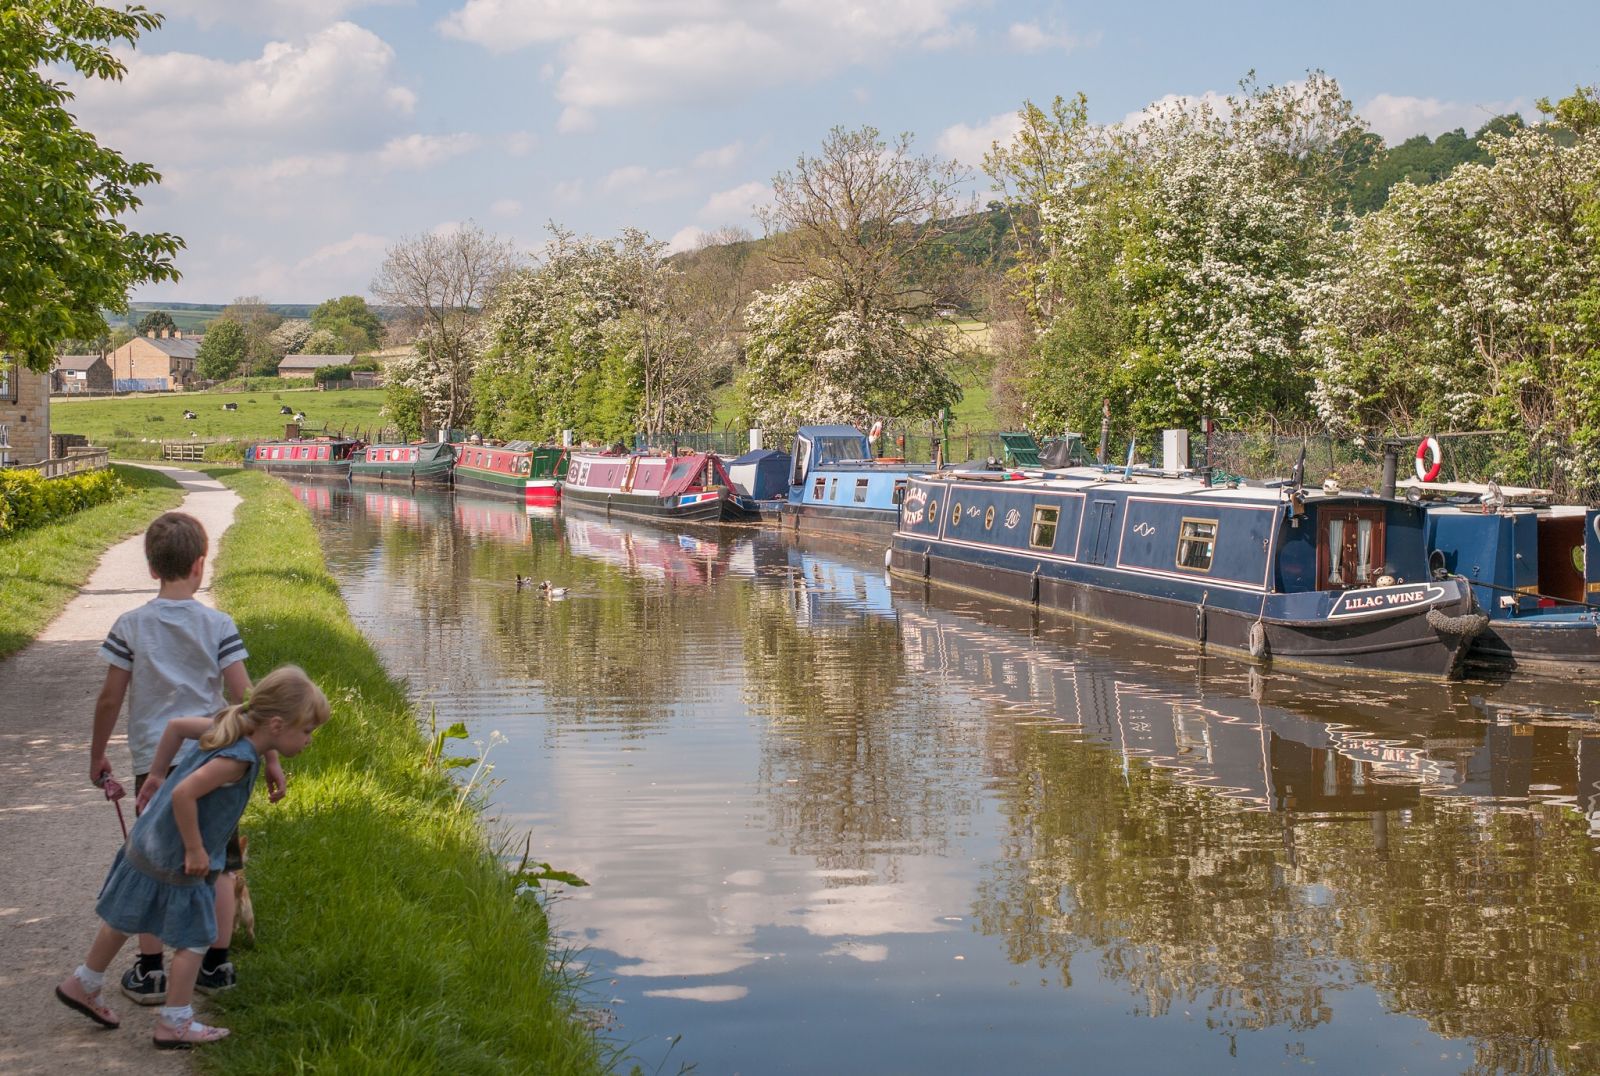 Leeds-Liverpool Canal at Micklethwaite, UK